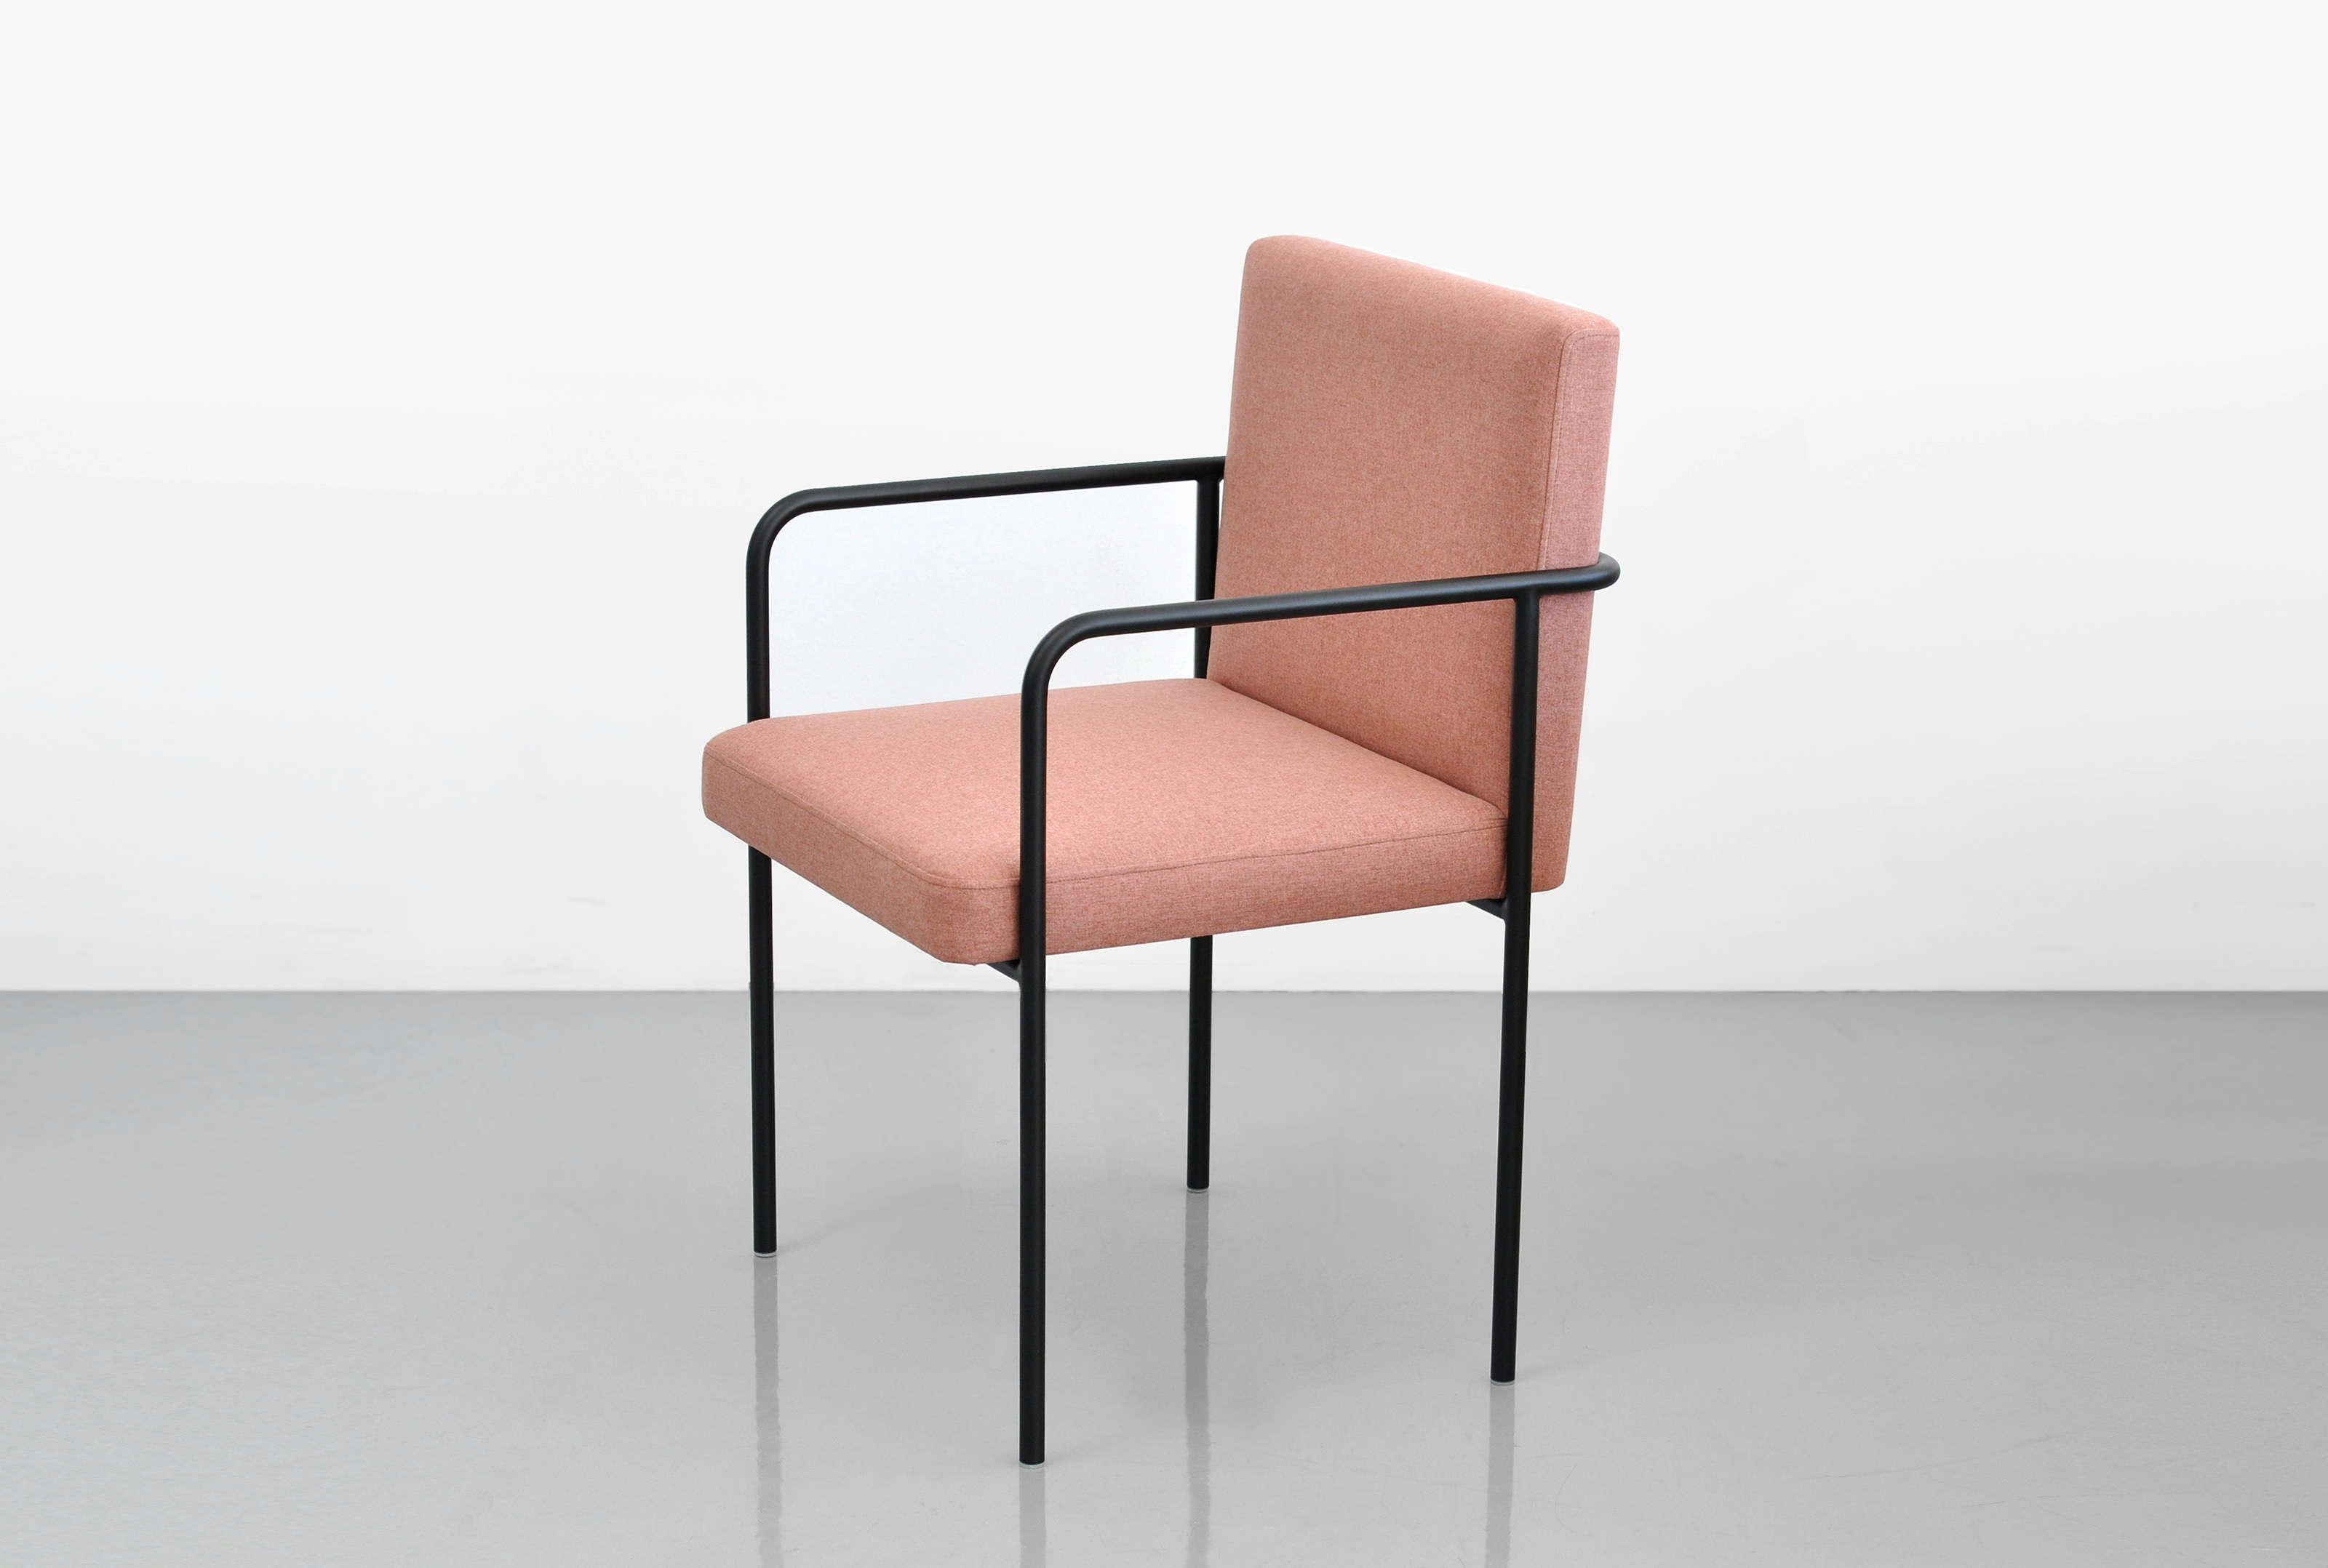 Phase Design Trolley Side Chair 5 Web